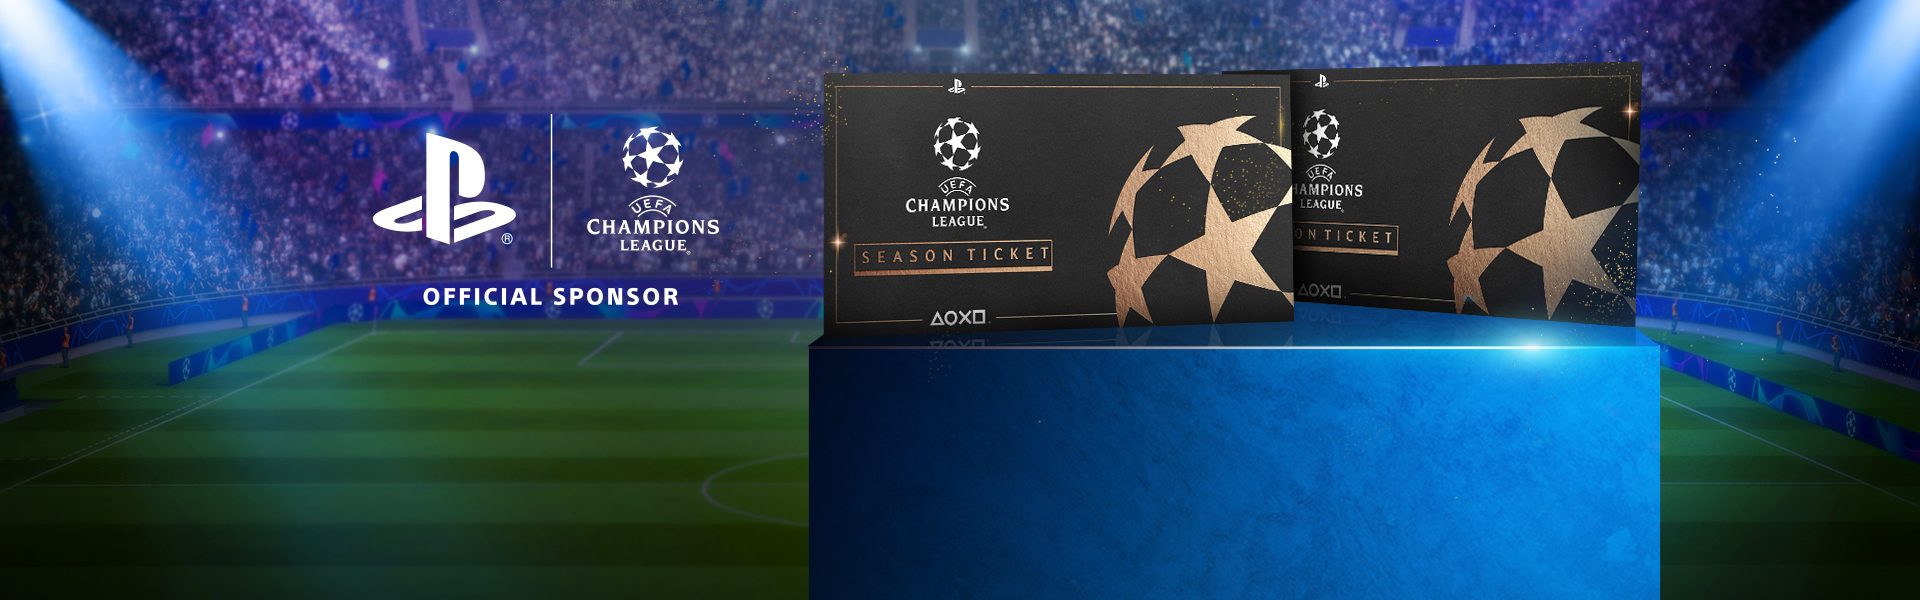 win tickets to the champions league final